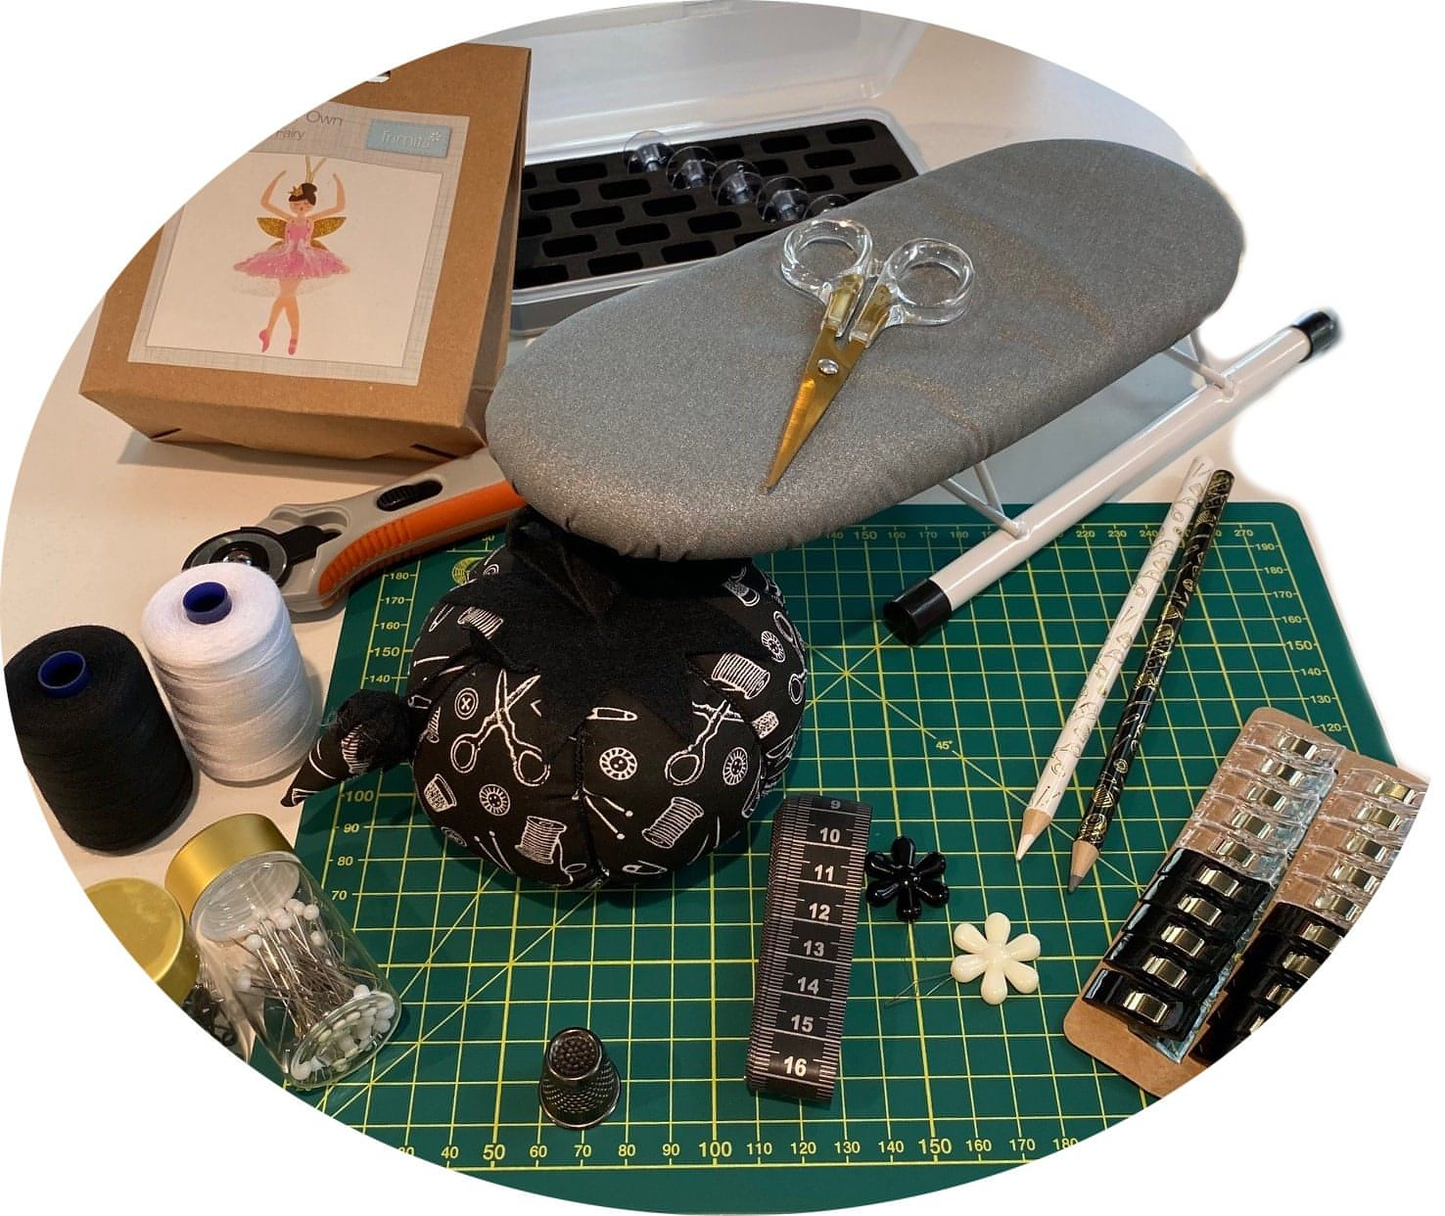 Deluxe Sewing Accessory Gift Bundle with 17 products * Black and Gold theme *